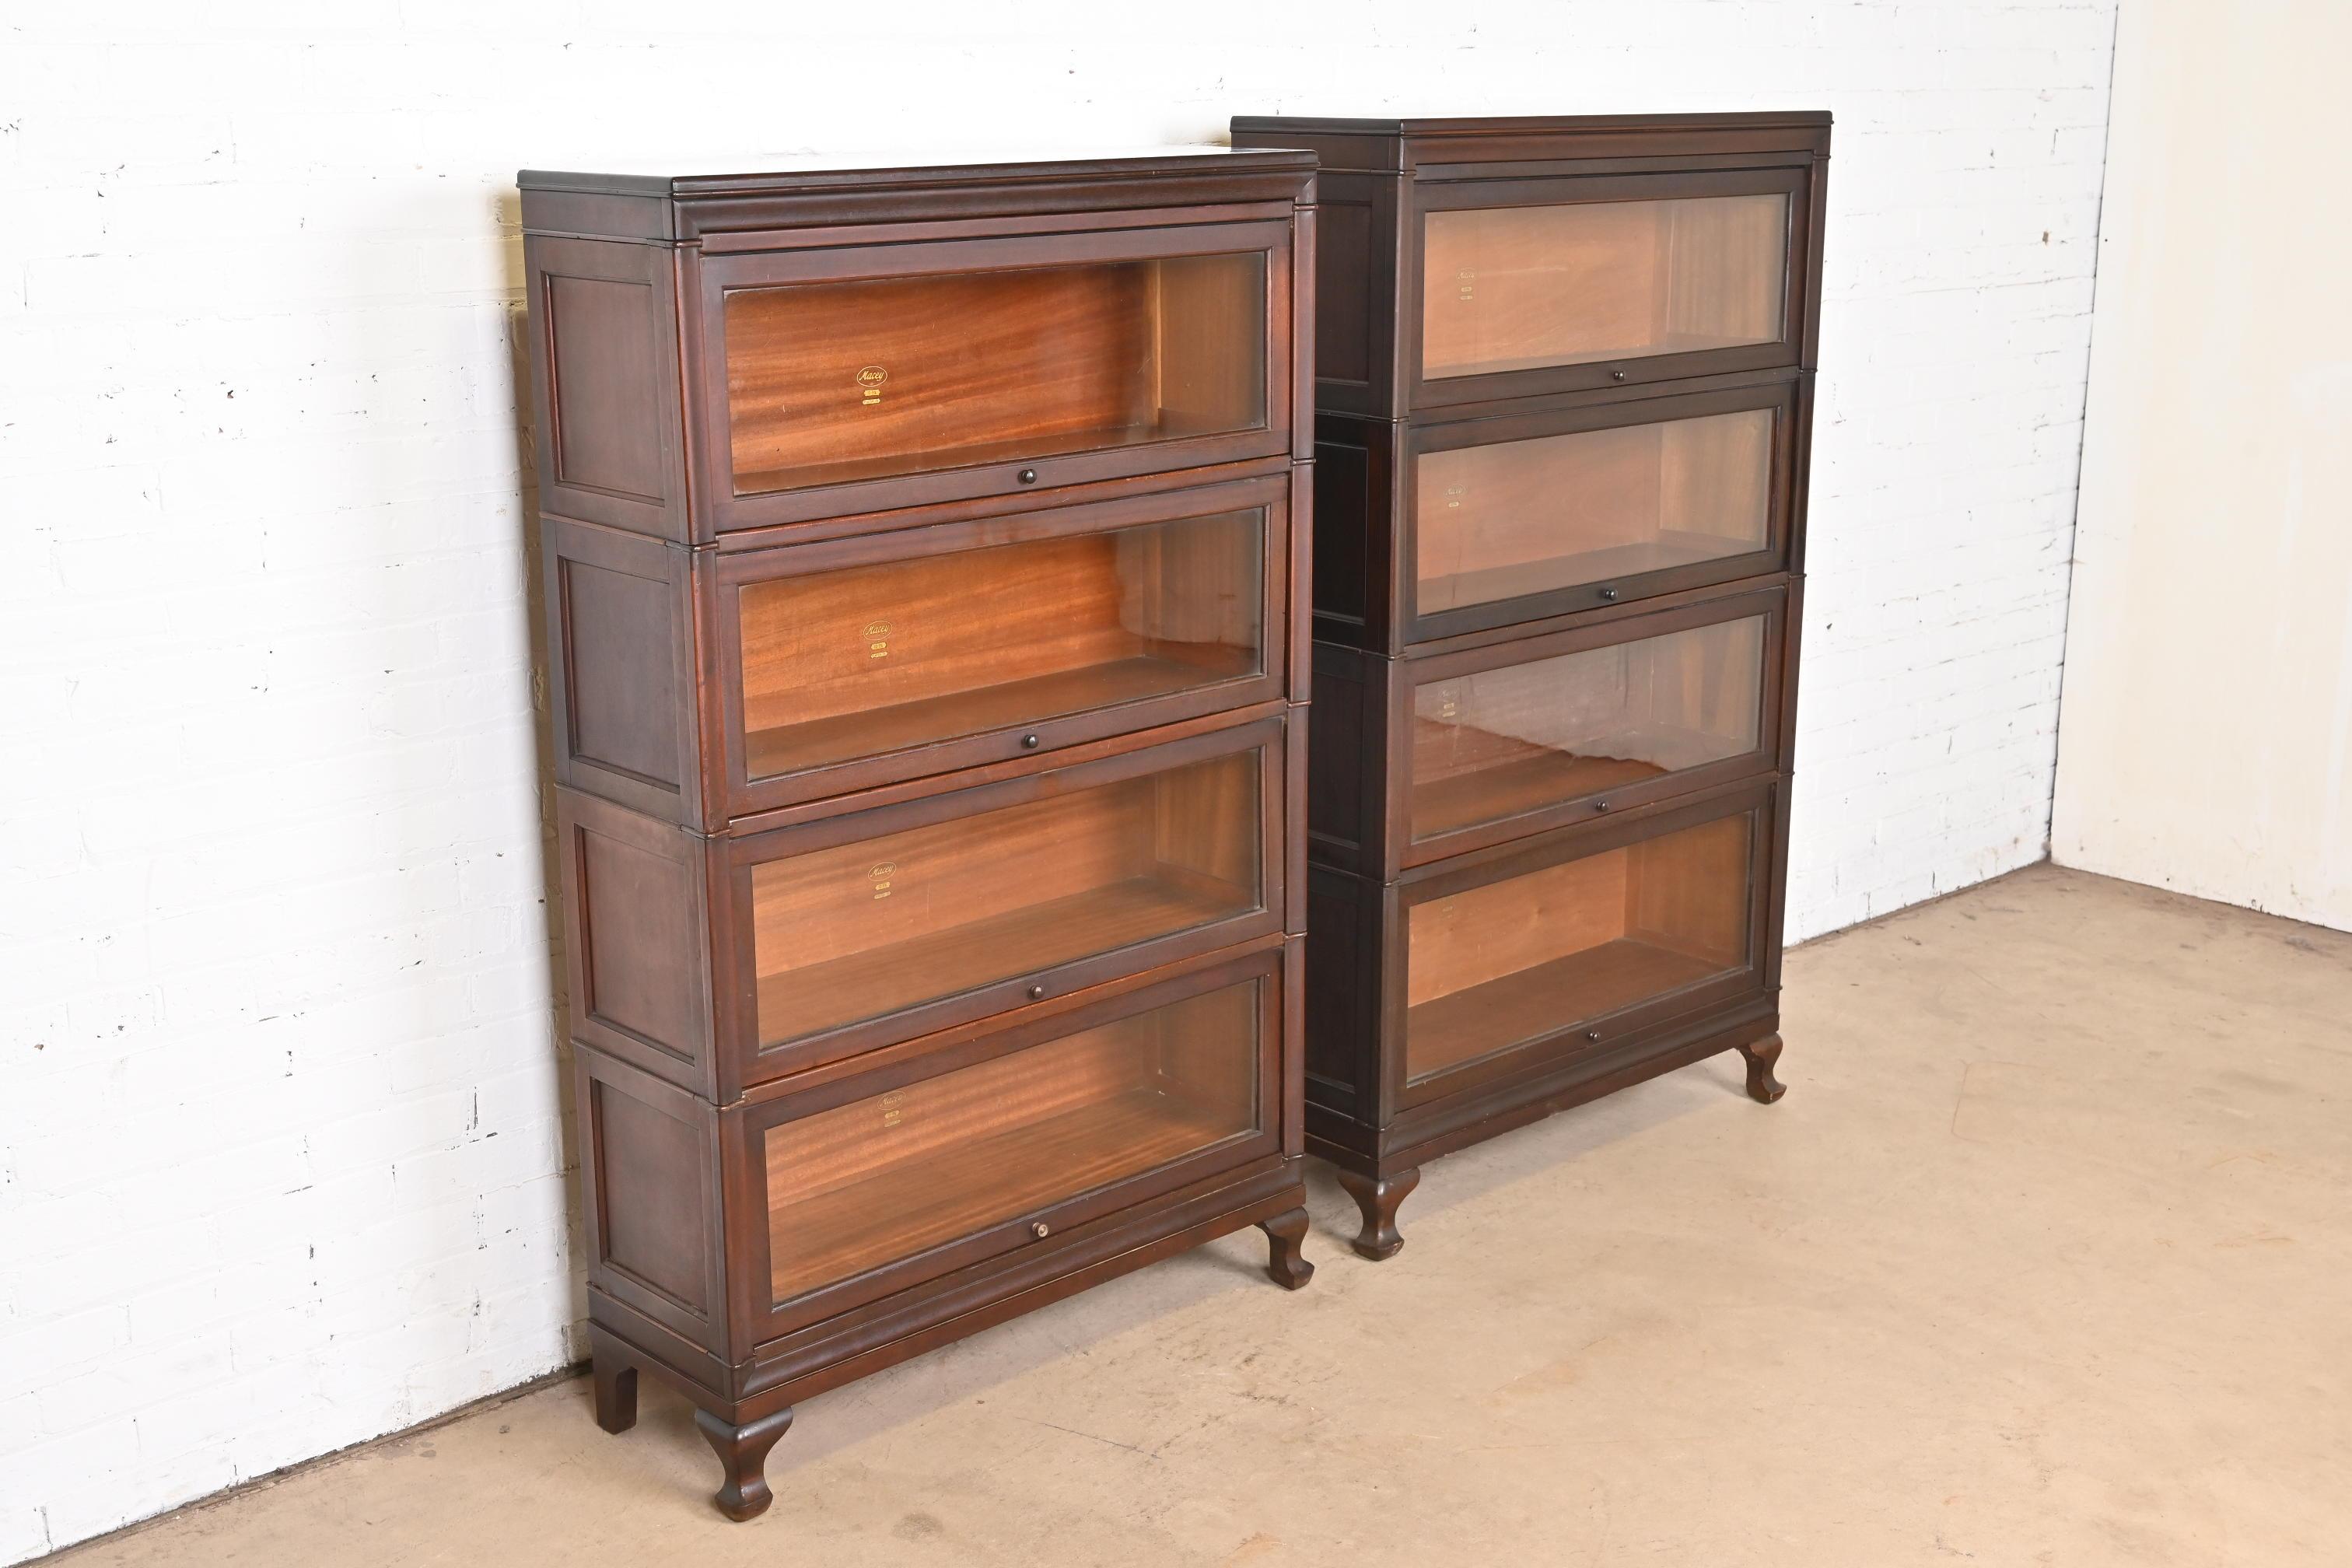 Antique Arts & Crafts Mahogany Four-Stack Barrister Bookcases by Macey, Pair In Good Condition For Sale In South Bend, IN